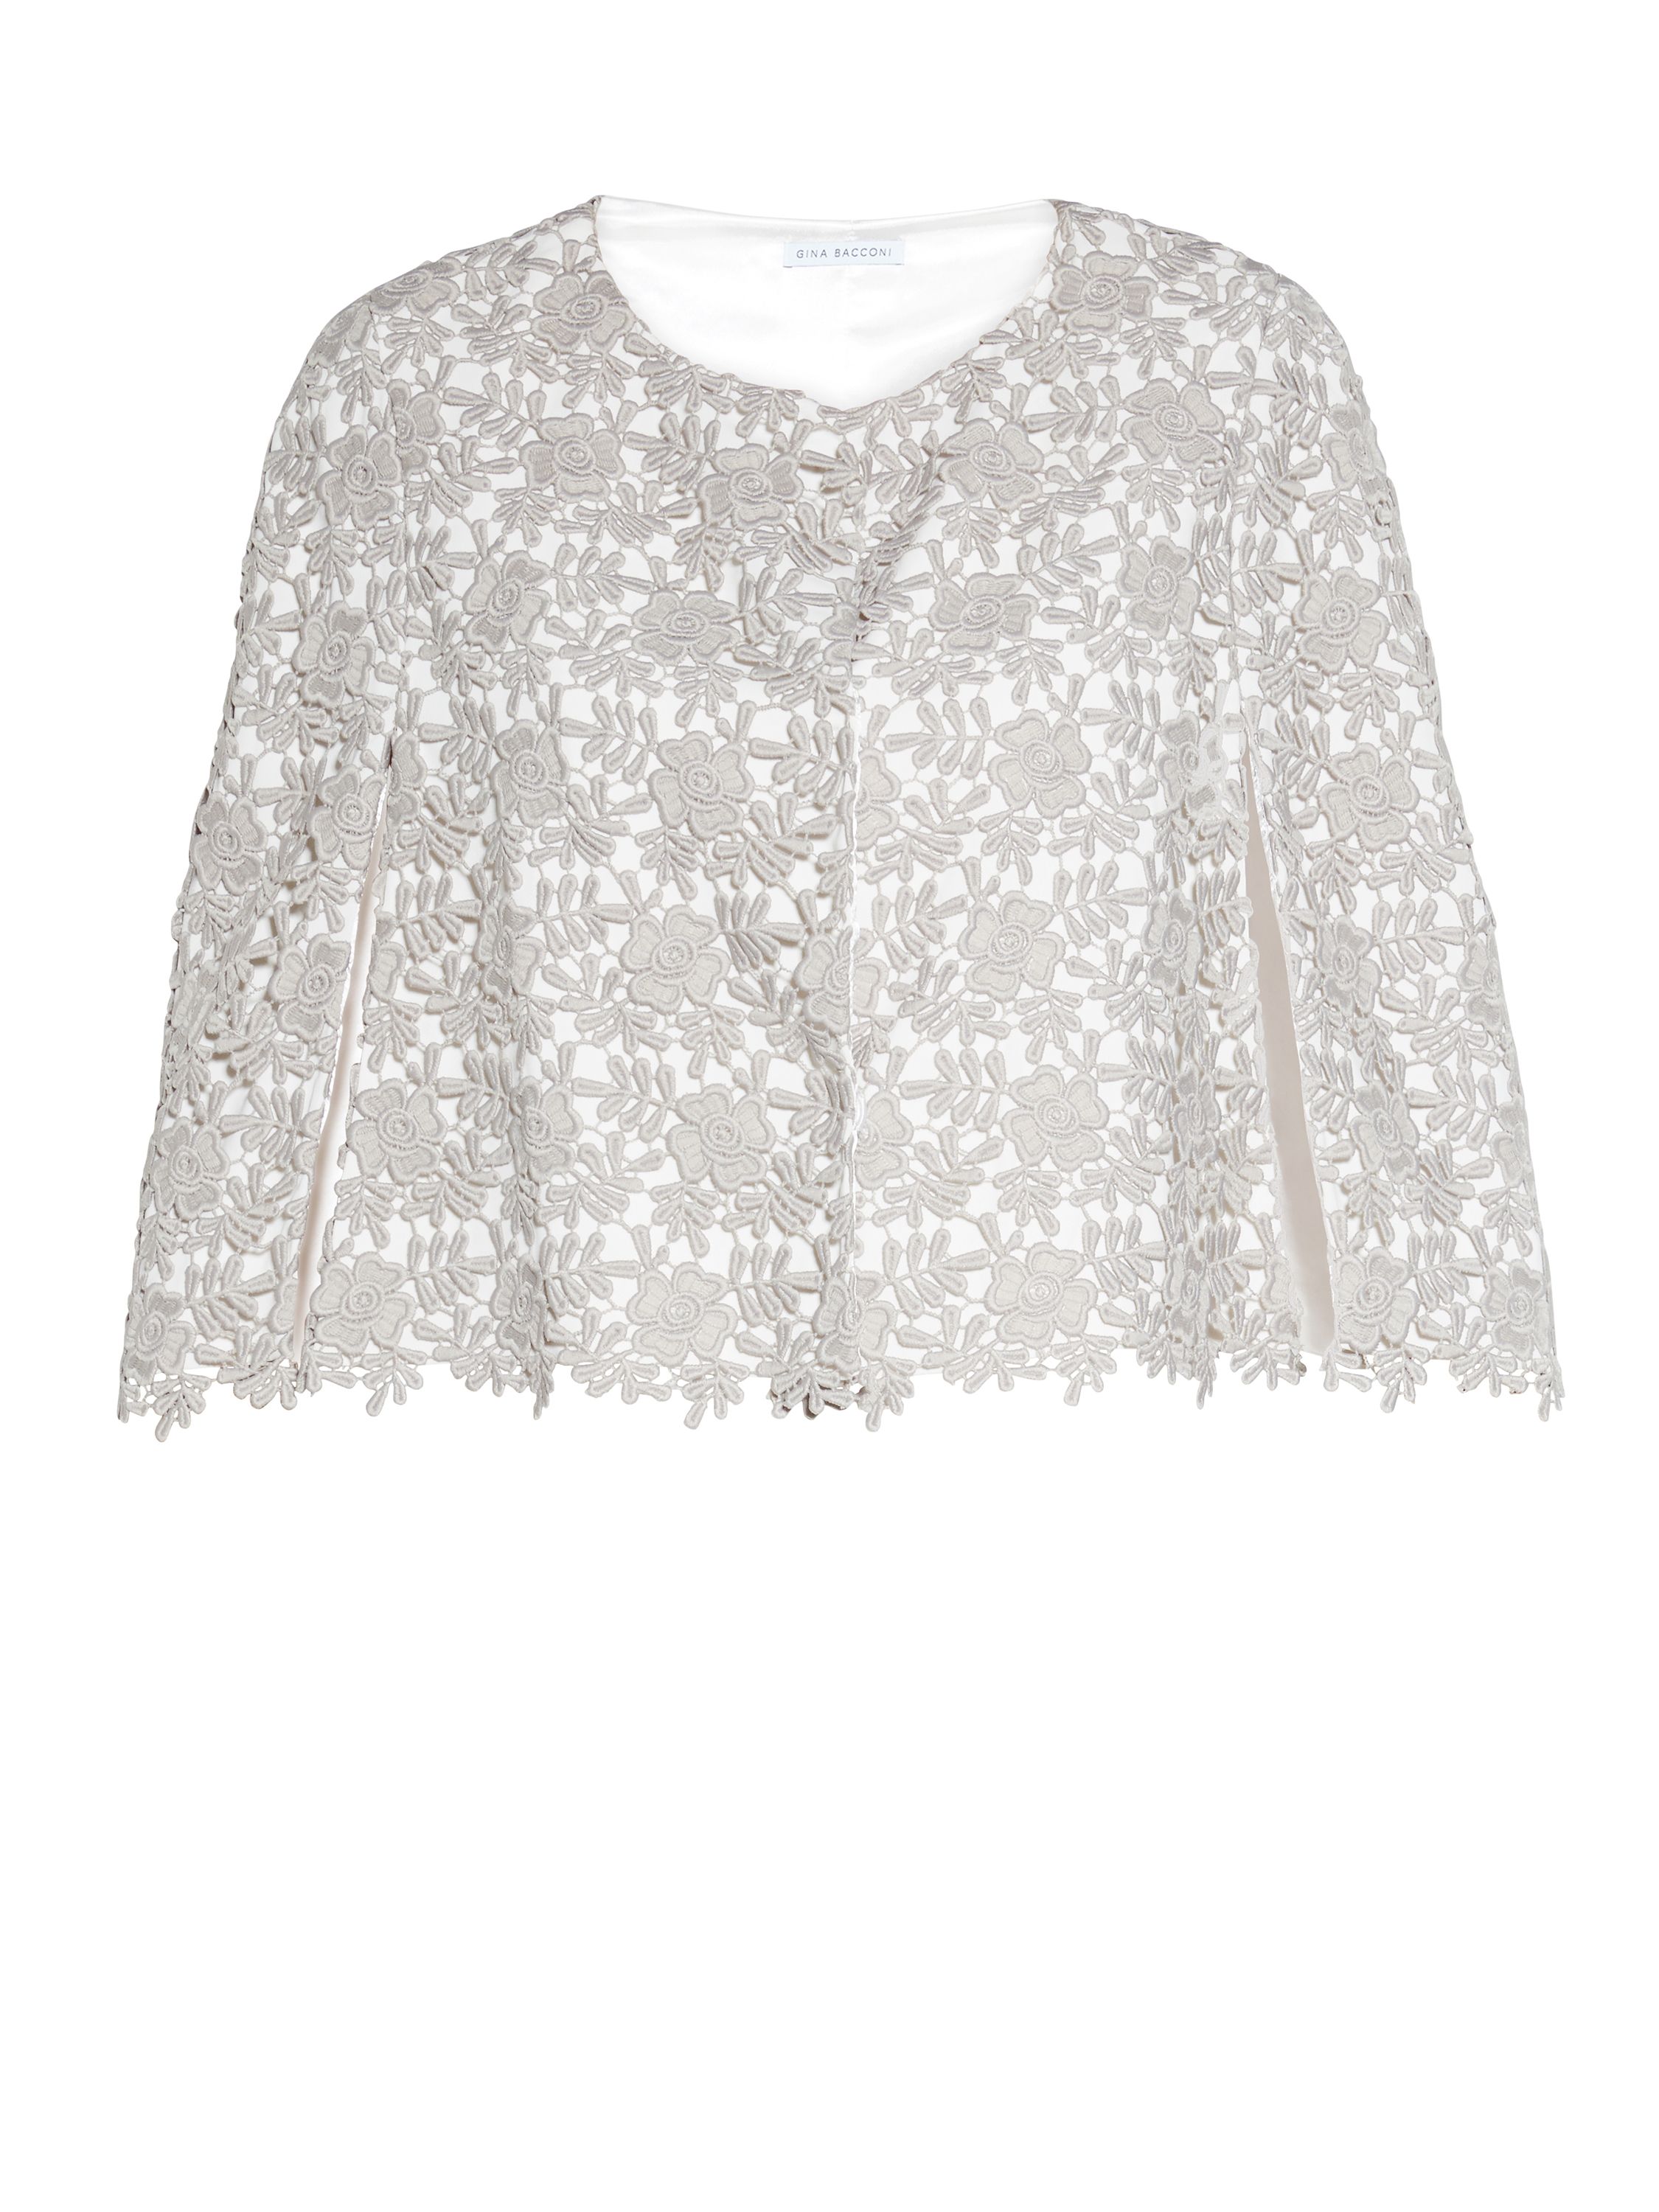 Keep those shoulders warm in style with this beautiful Gina Bacconi cape. The cape is fashioned out of beautiful floral lace guipure giving it a beautiful finish at the hem. There is a fastening at the front and the piece is fully lined with a satin finish to make the cape luxurious to wear.